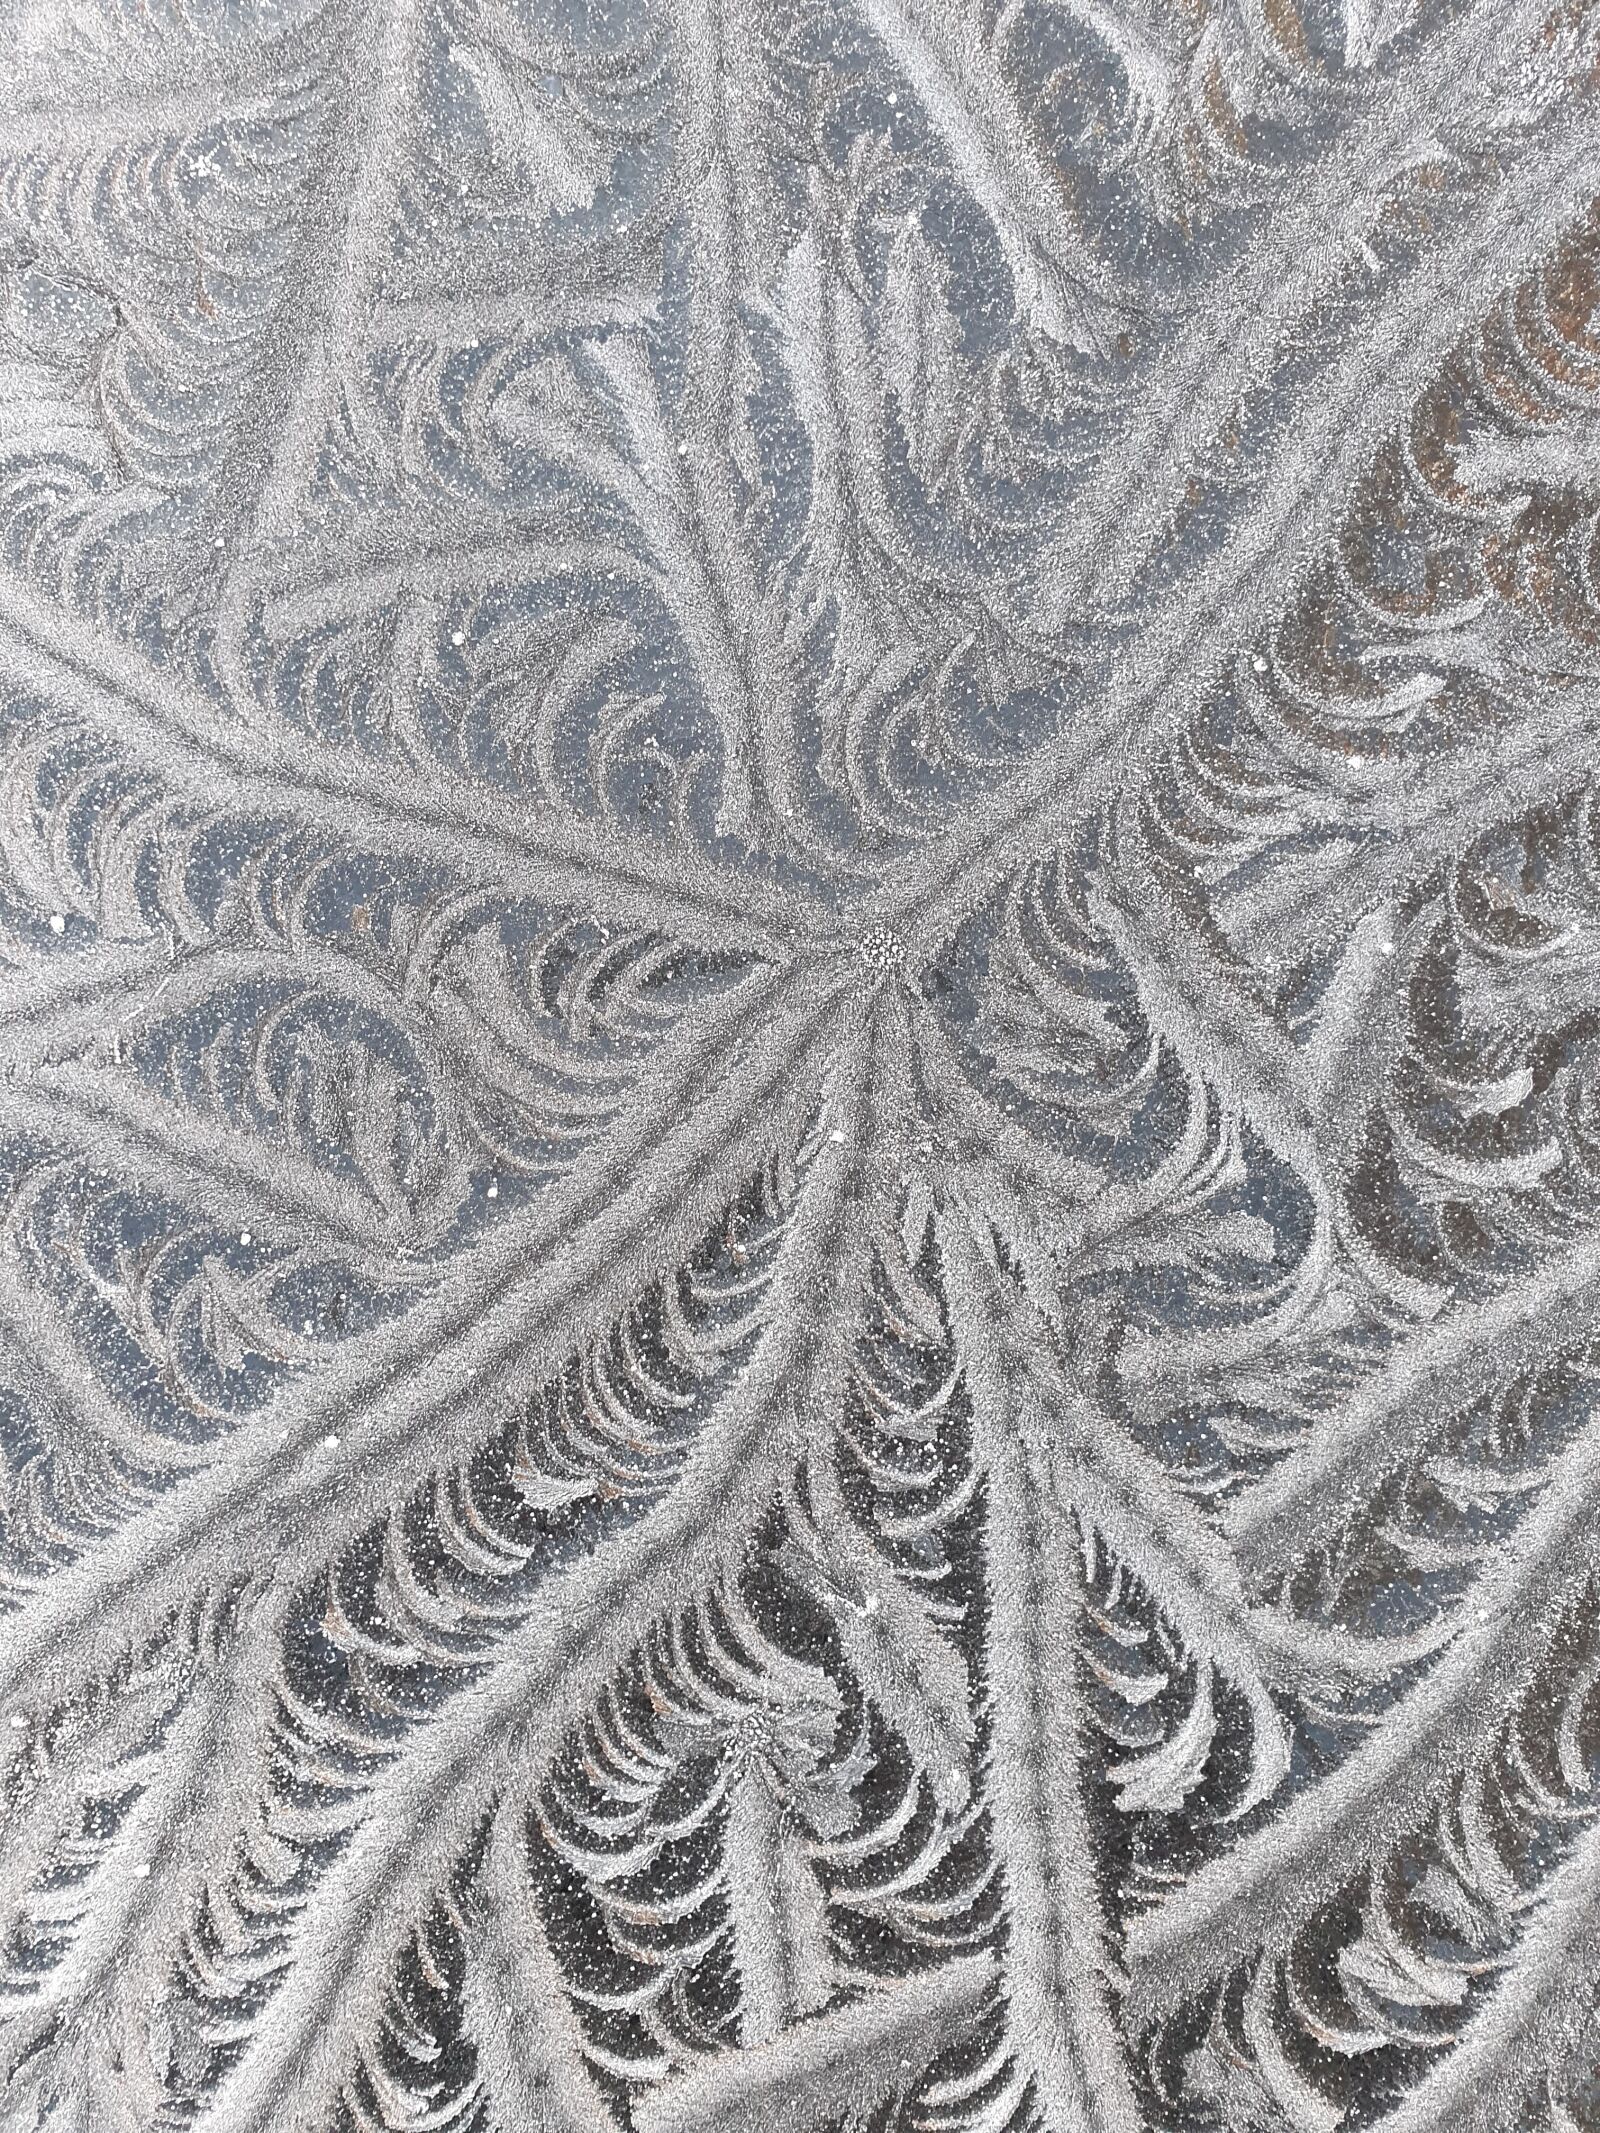 Samsung Galaxy S9 sample photo. Frost, ice, natures patterns photography